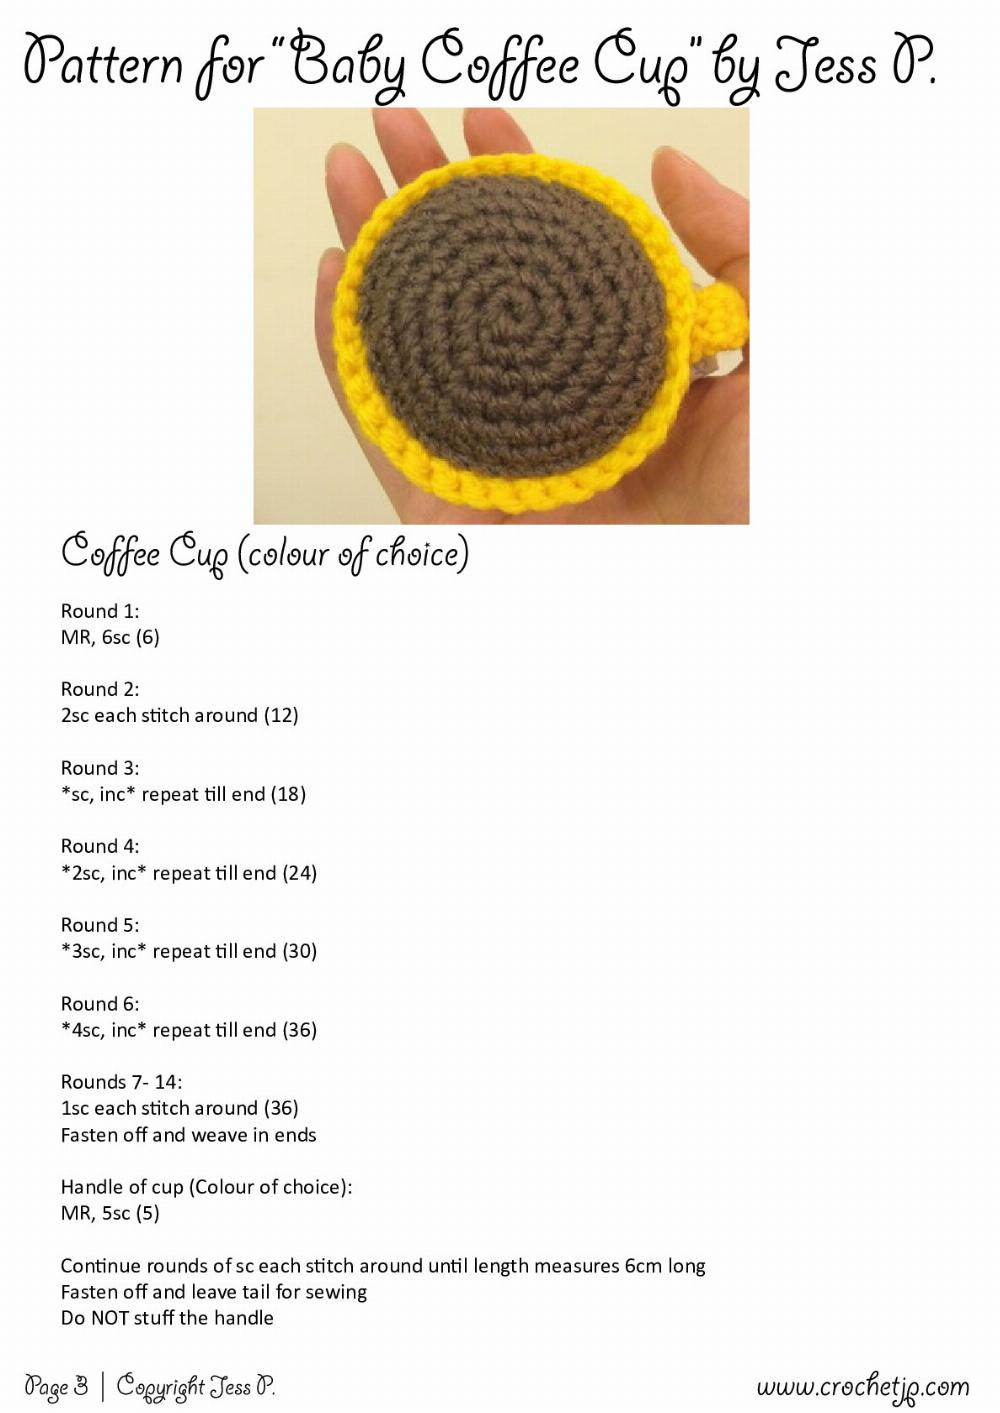 Pattern for “Baby Coffee Cup”